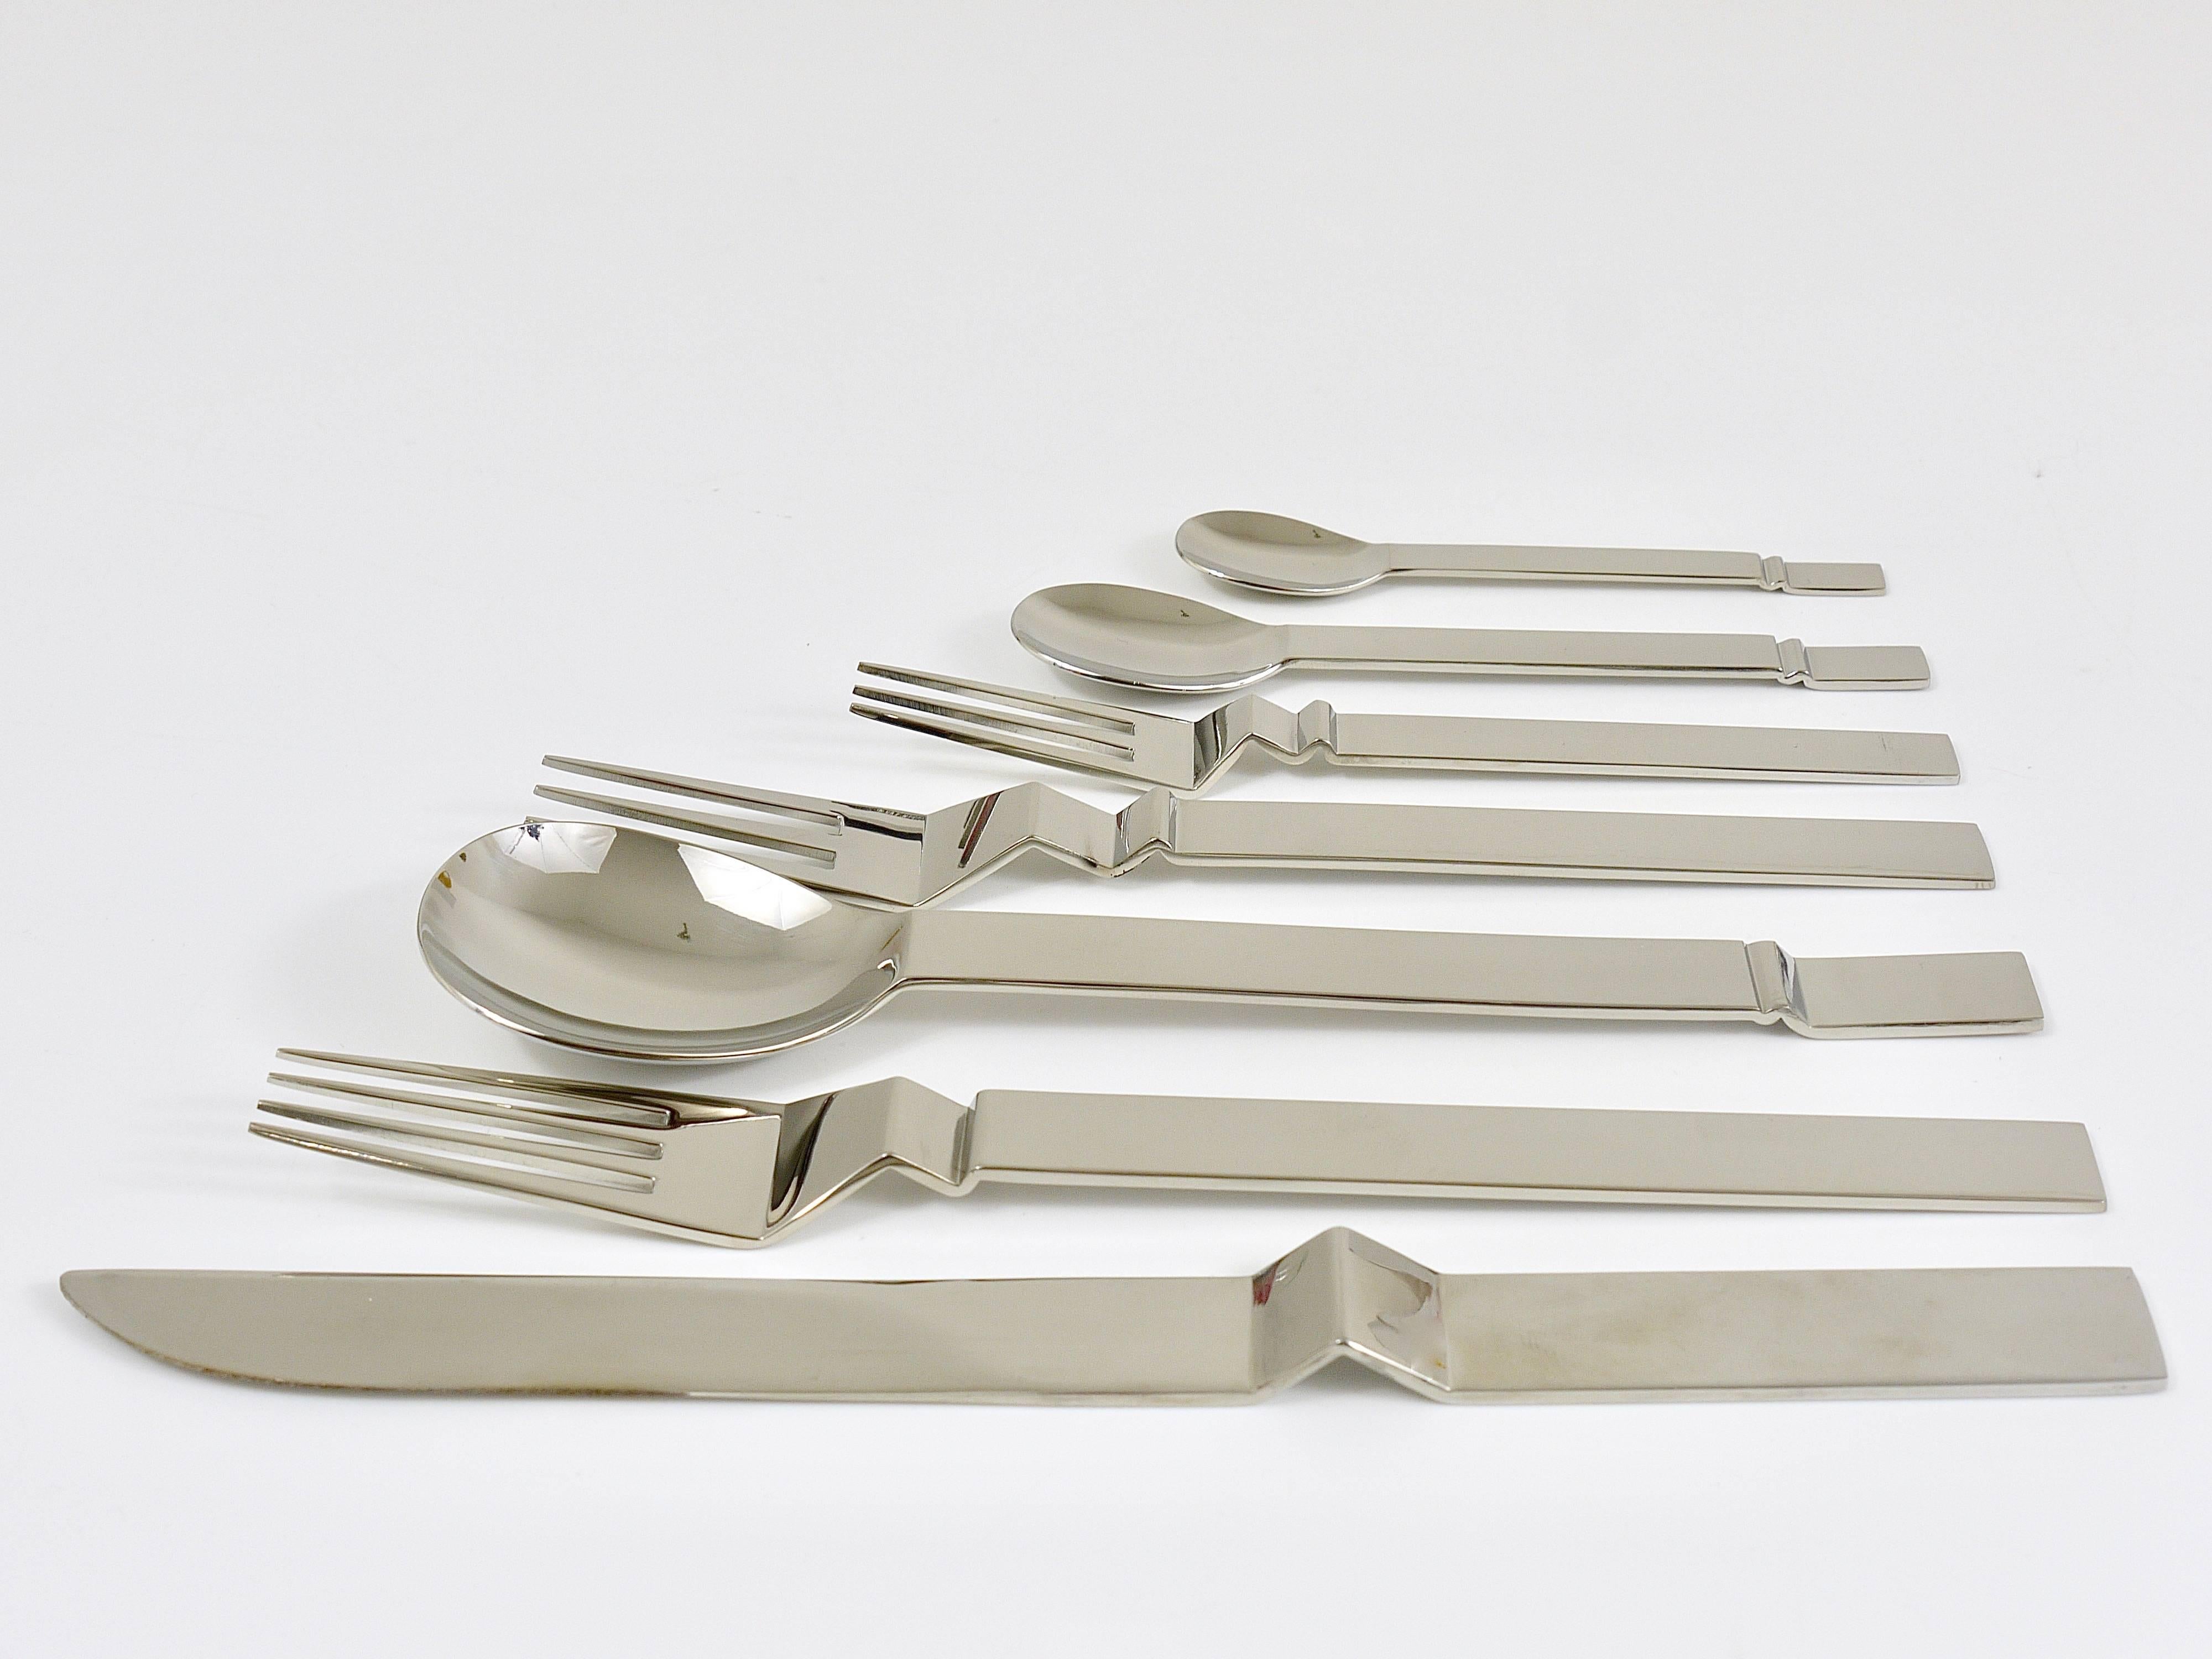 Stainless Steel Comprehensive Flatware Cutlery by Bob Patino for Berndorf, Austria, 1990s